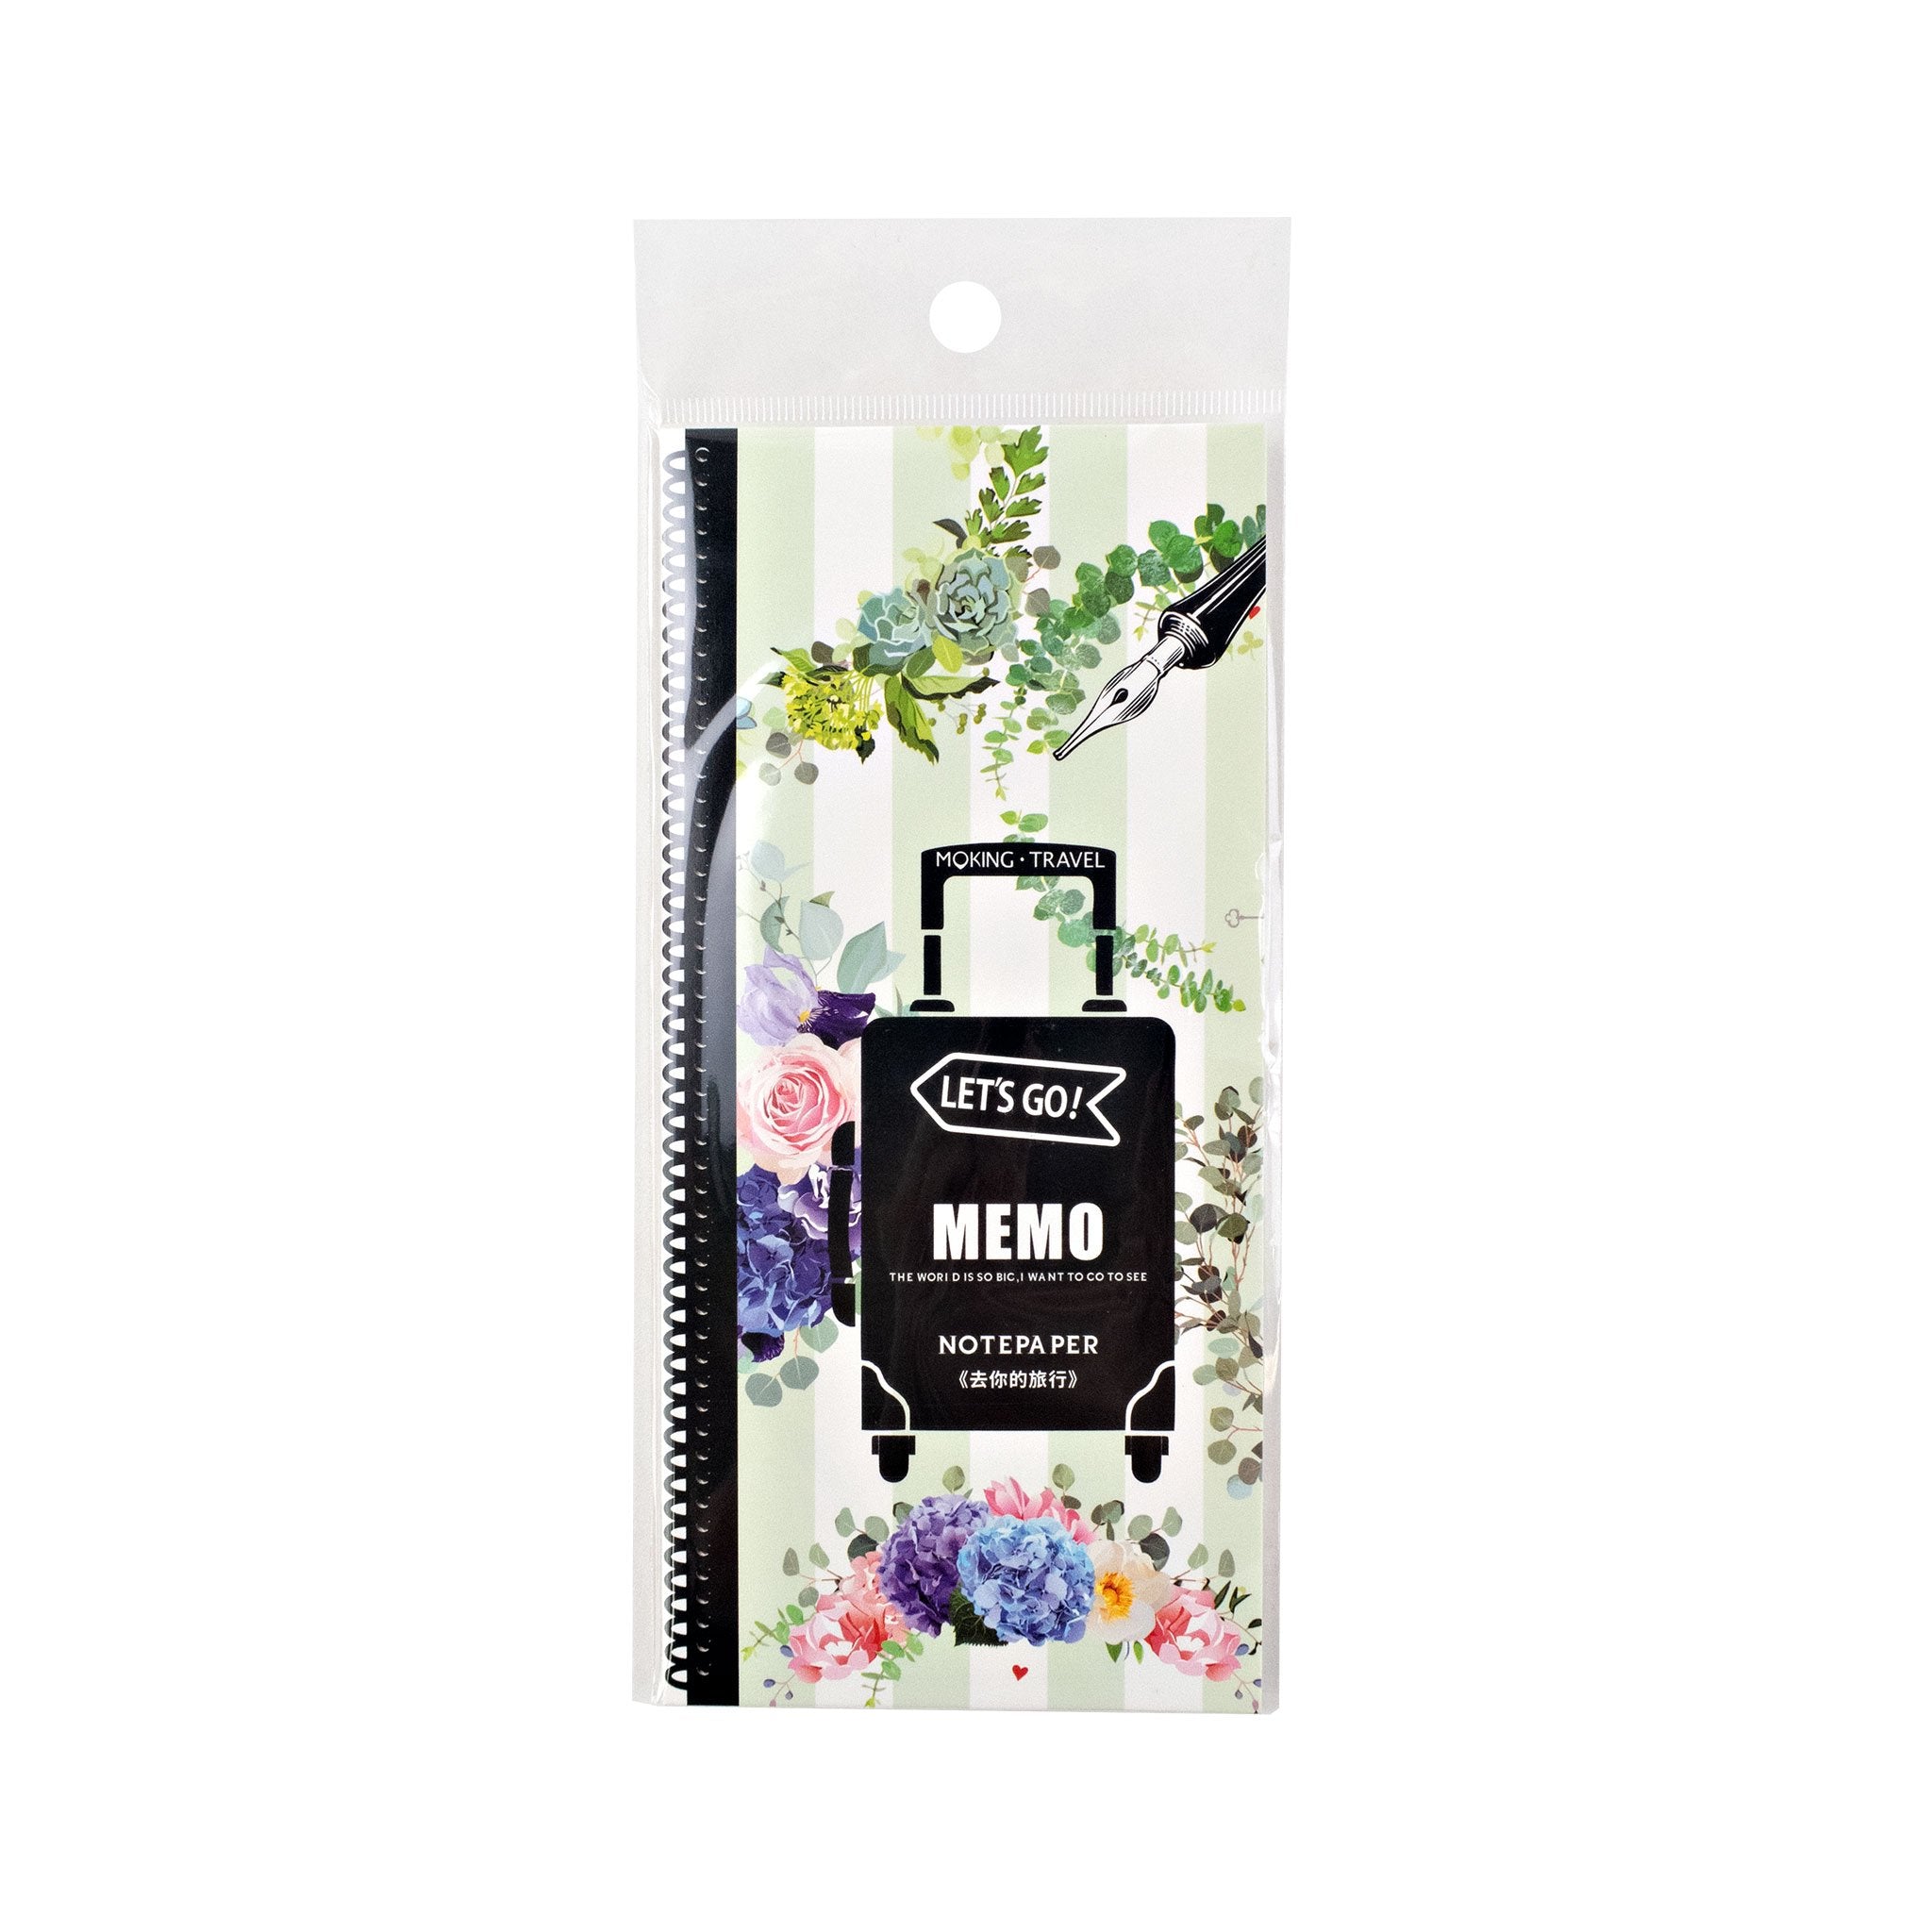 Floral Fantasy Mini Note Paper Pack